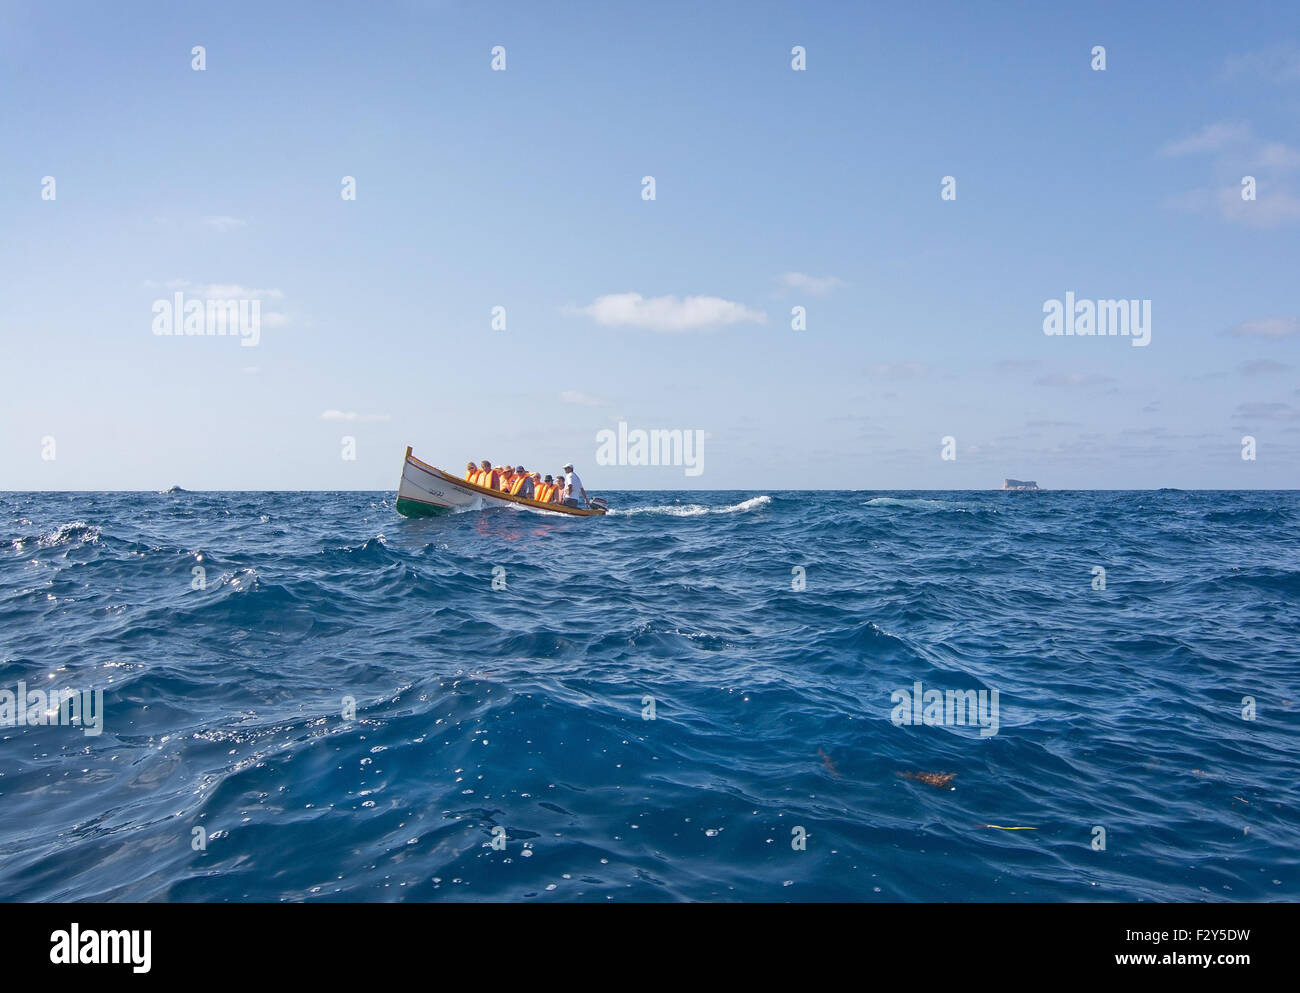 Boat with tourists in the blue water near of popular tourist attraction Blue Grotto in Malta. Stock Photo